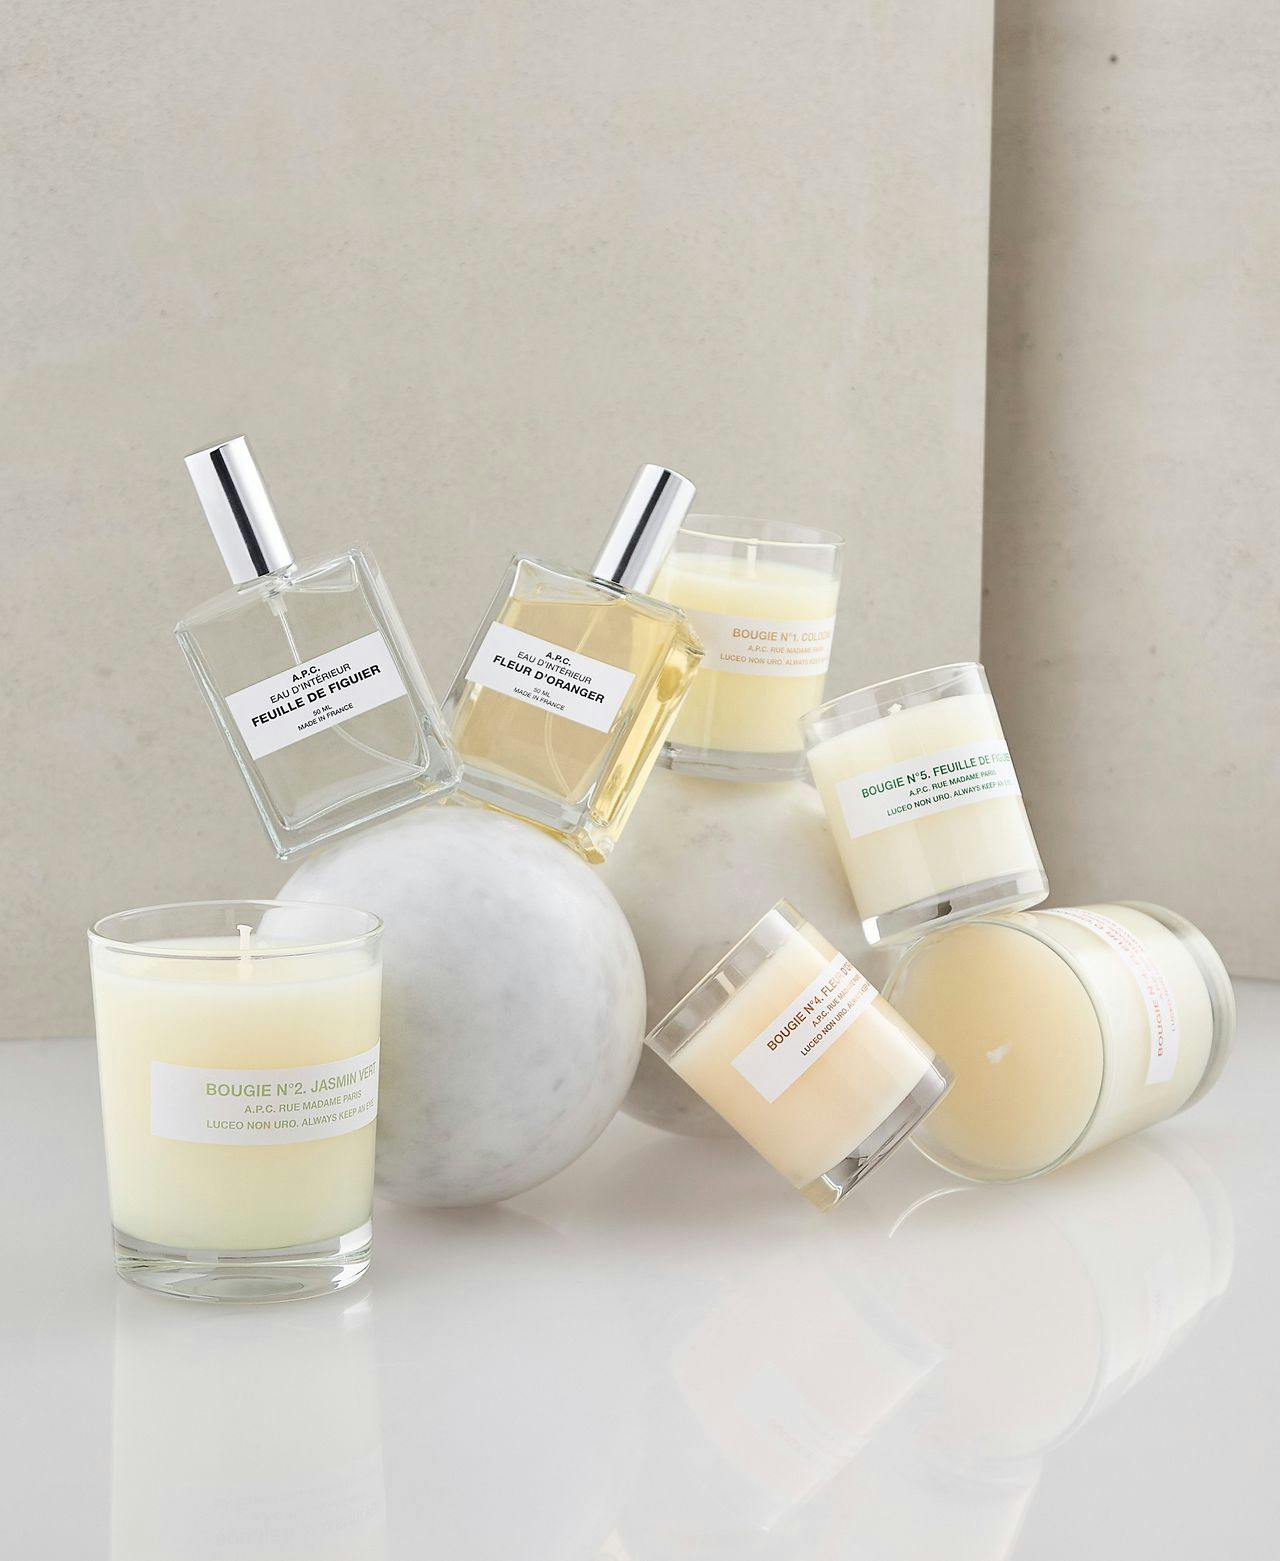 fragrances and candles on cream backrdop